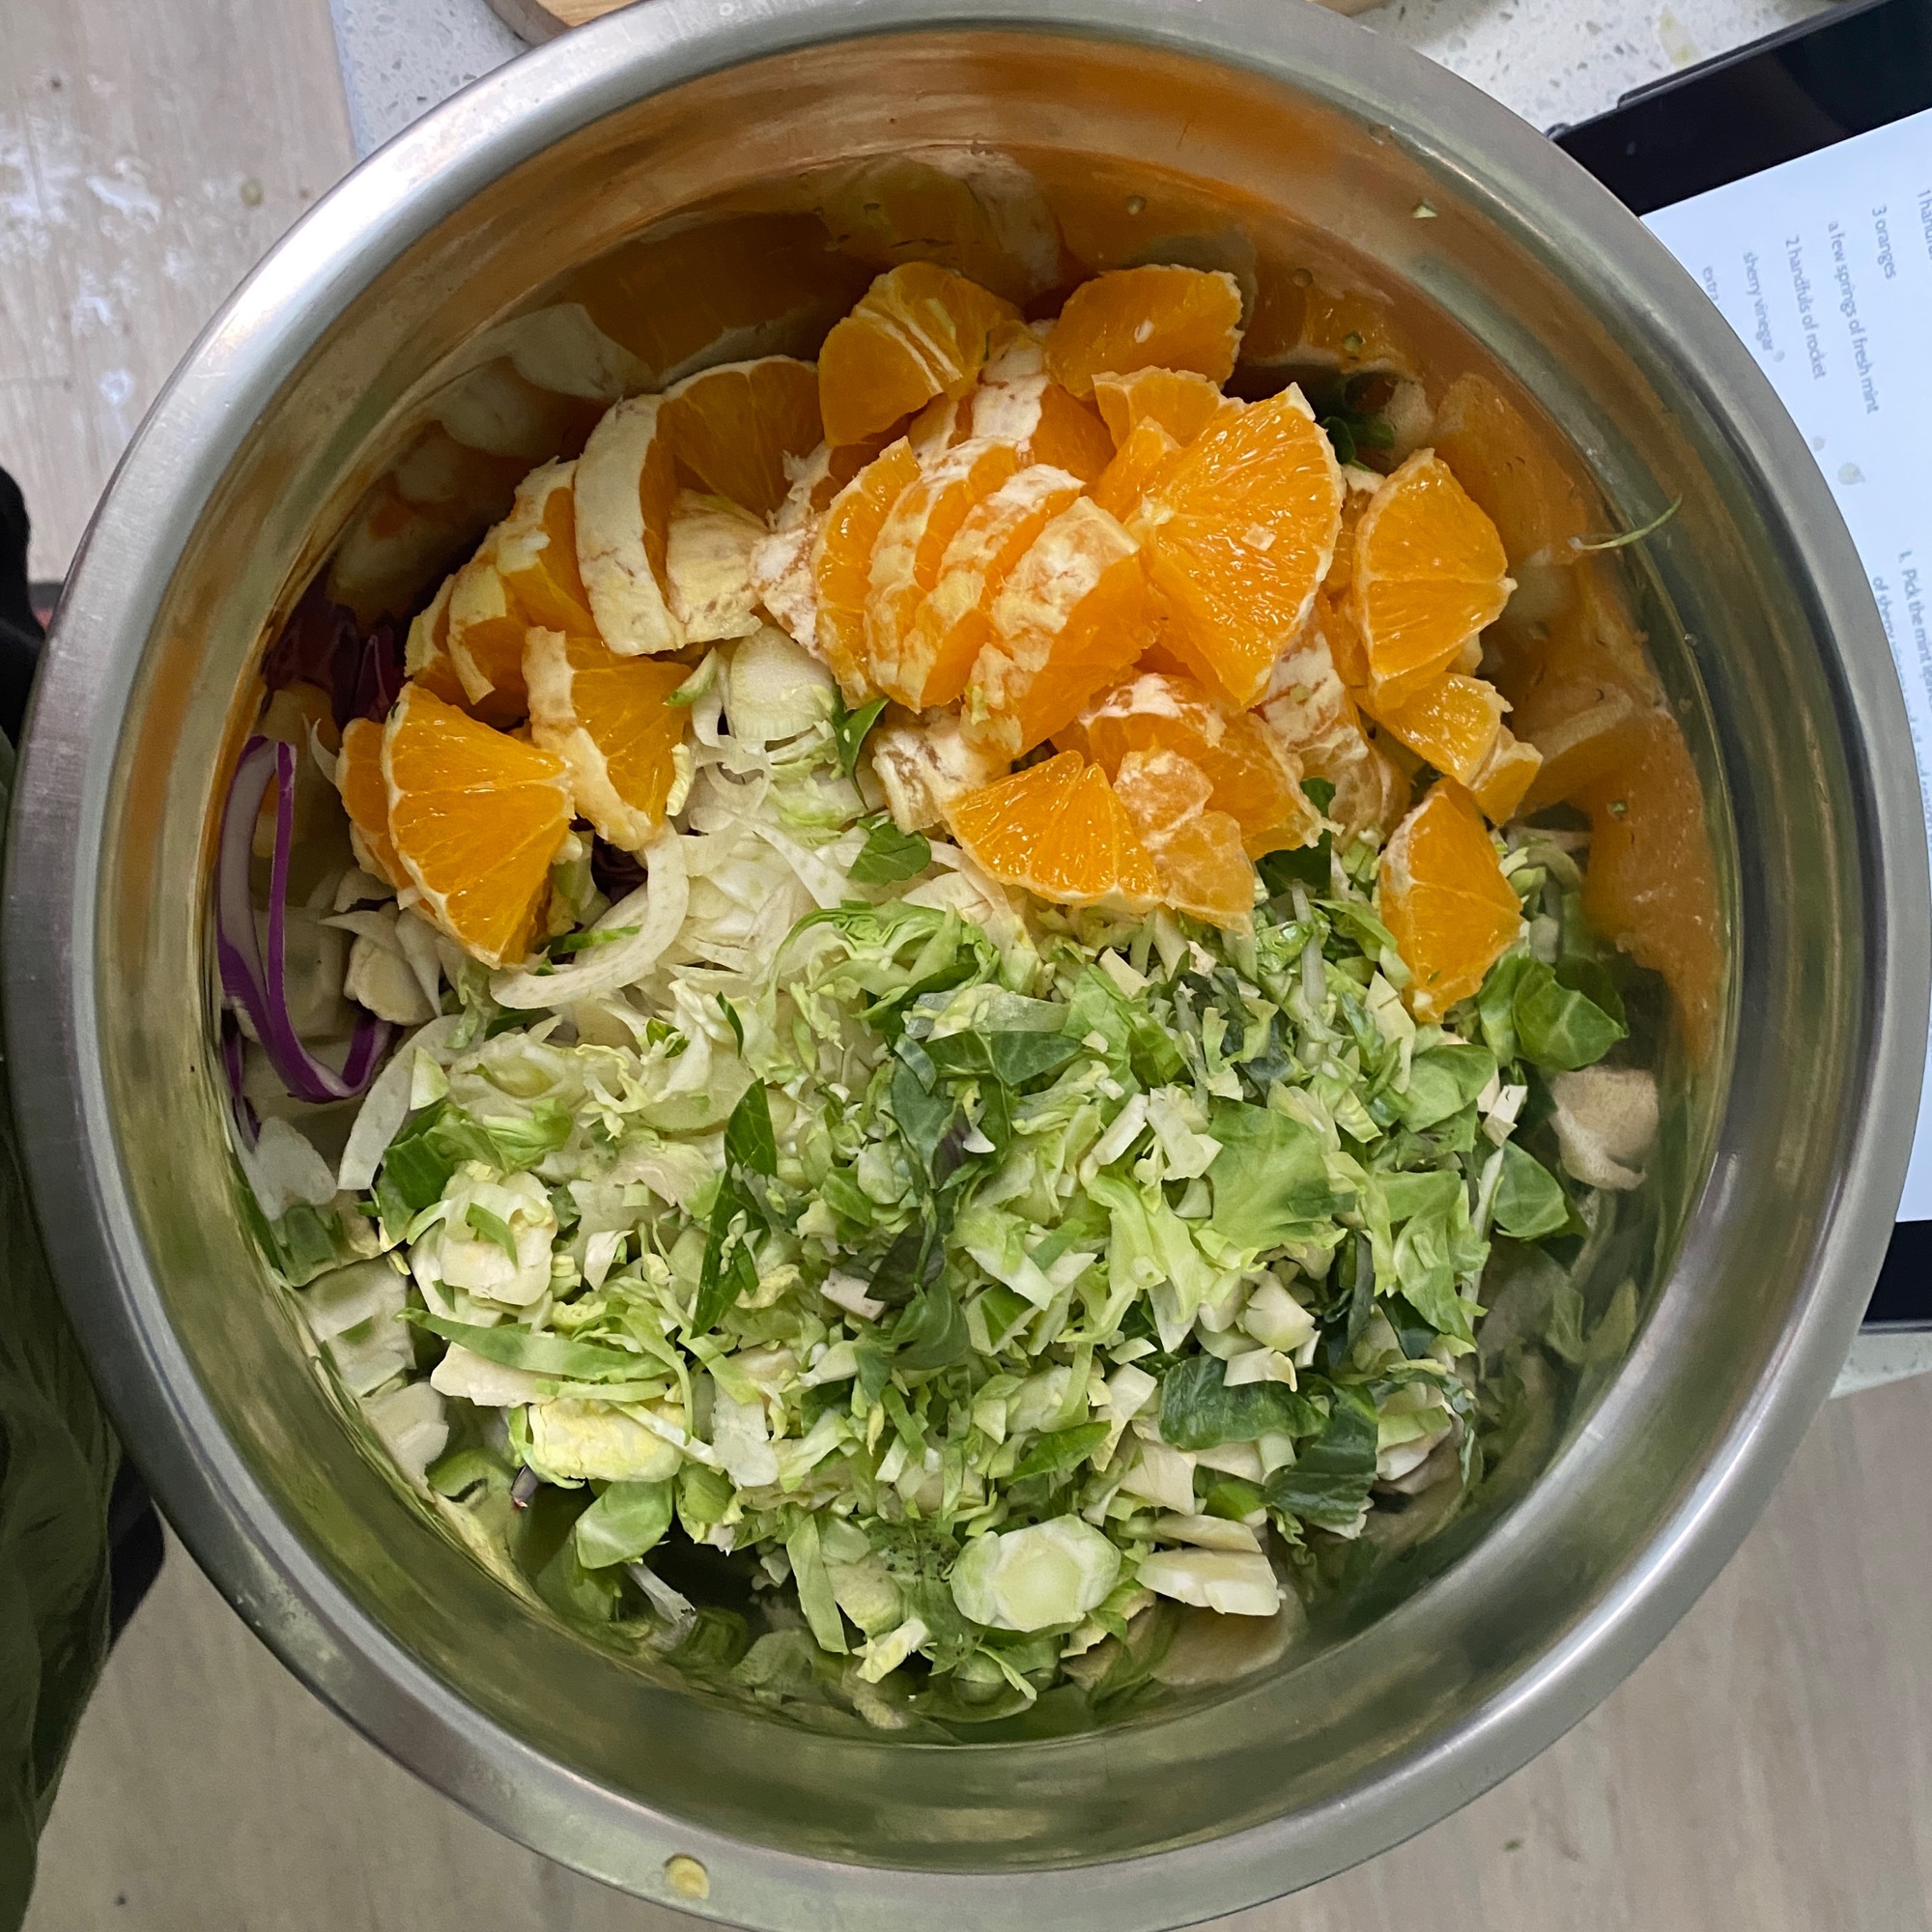 how to make salads that last all week - easy make ahead salads - fennel and orange salad